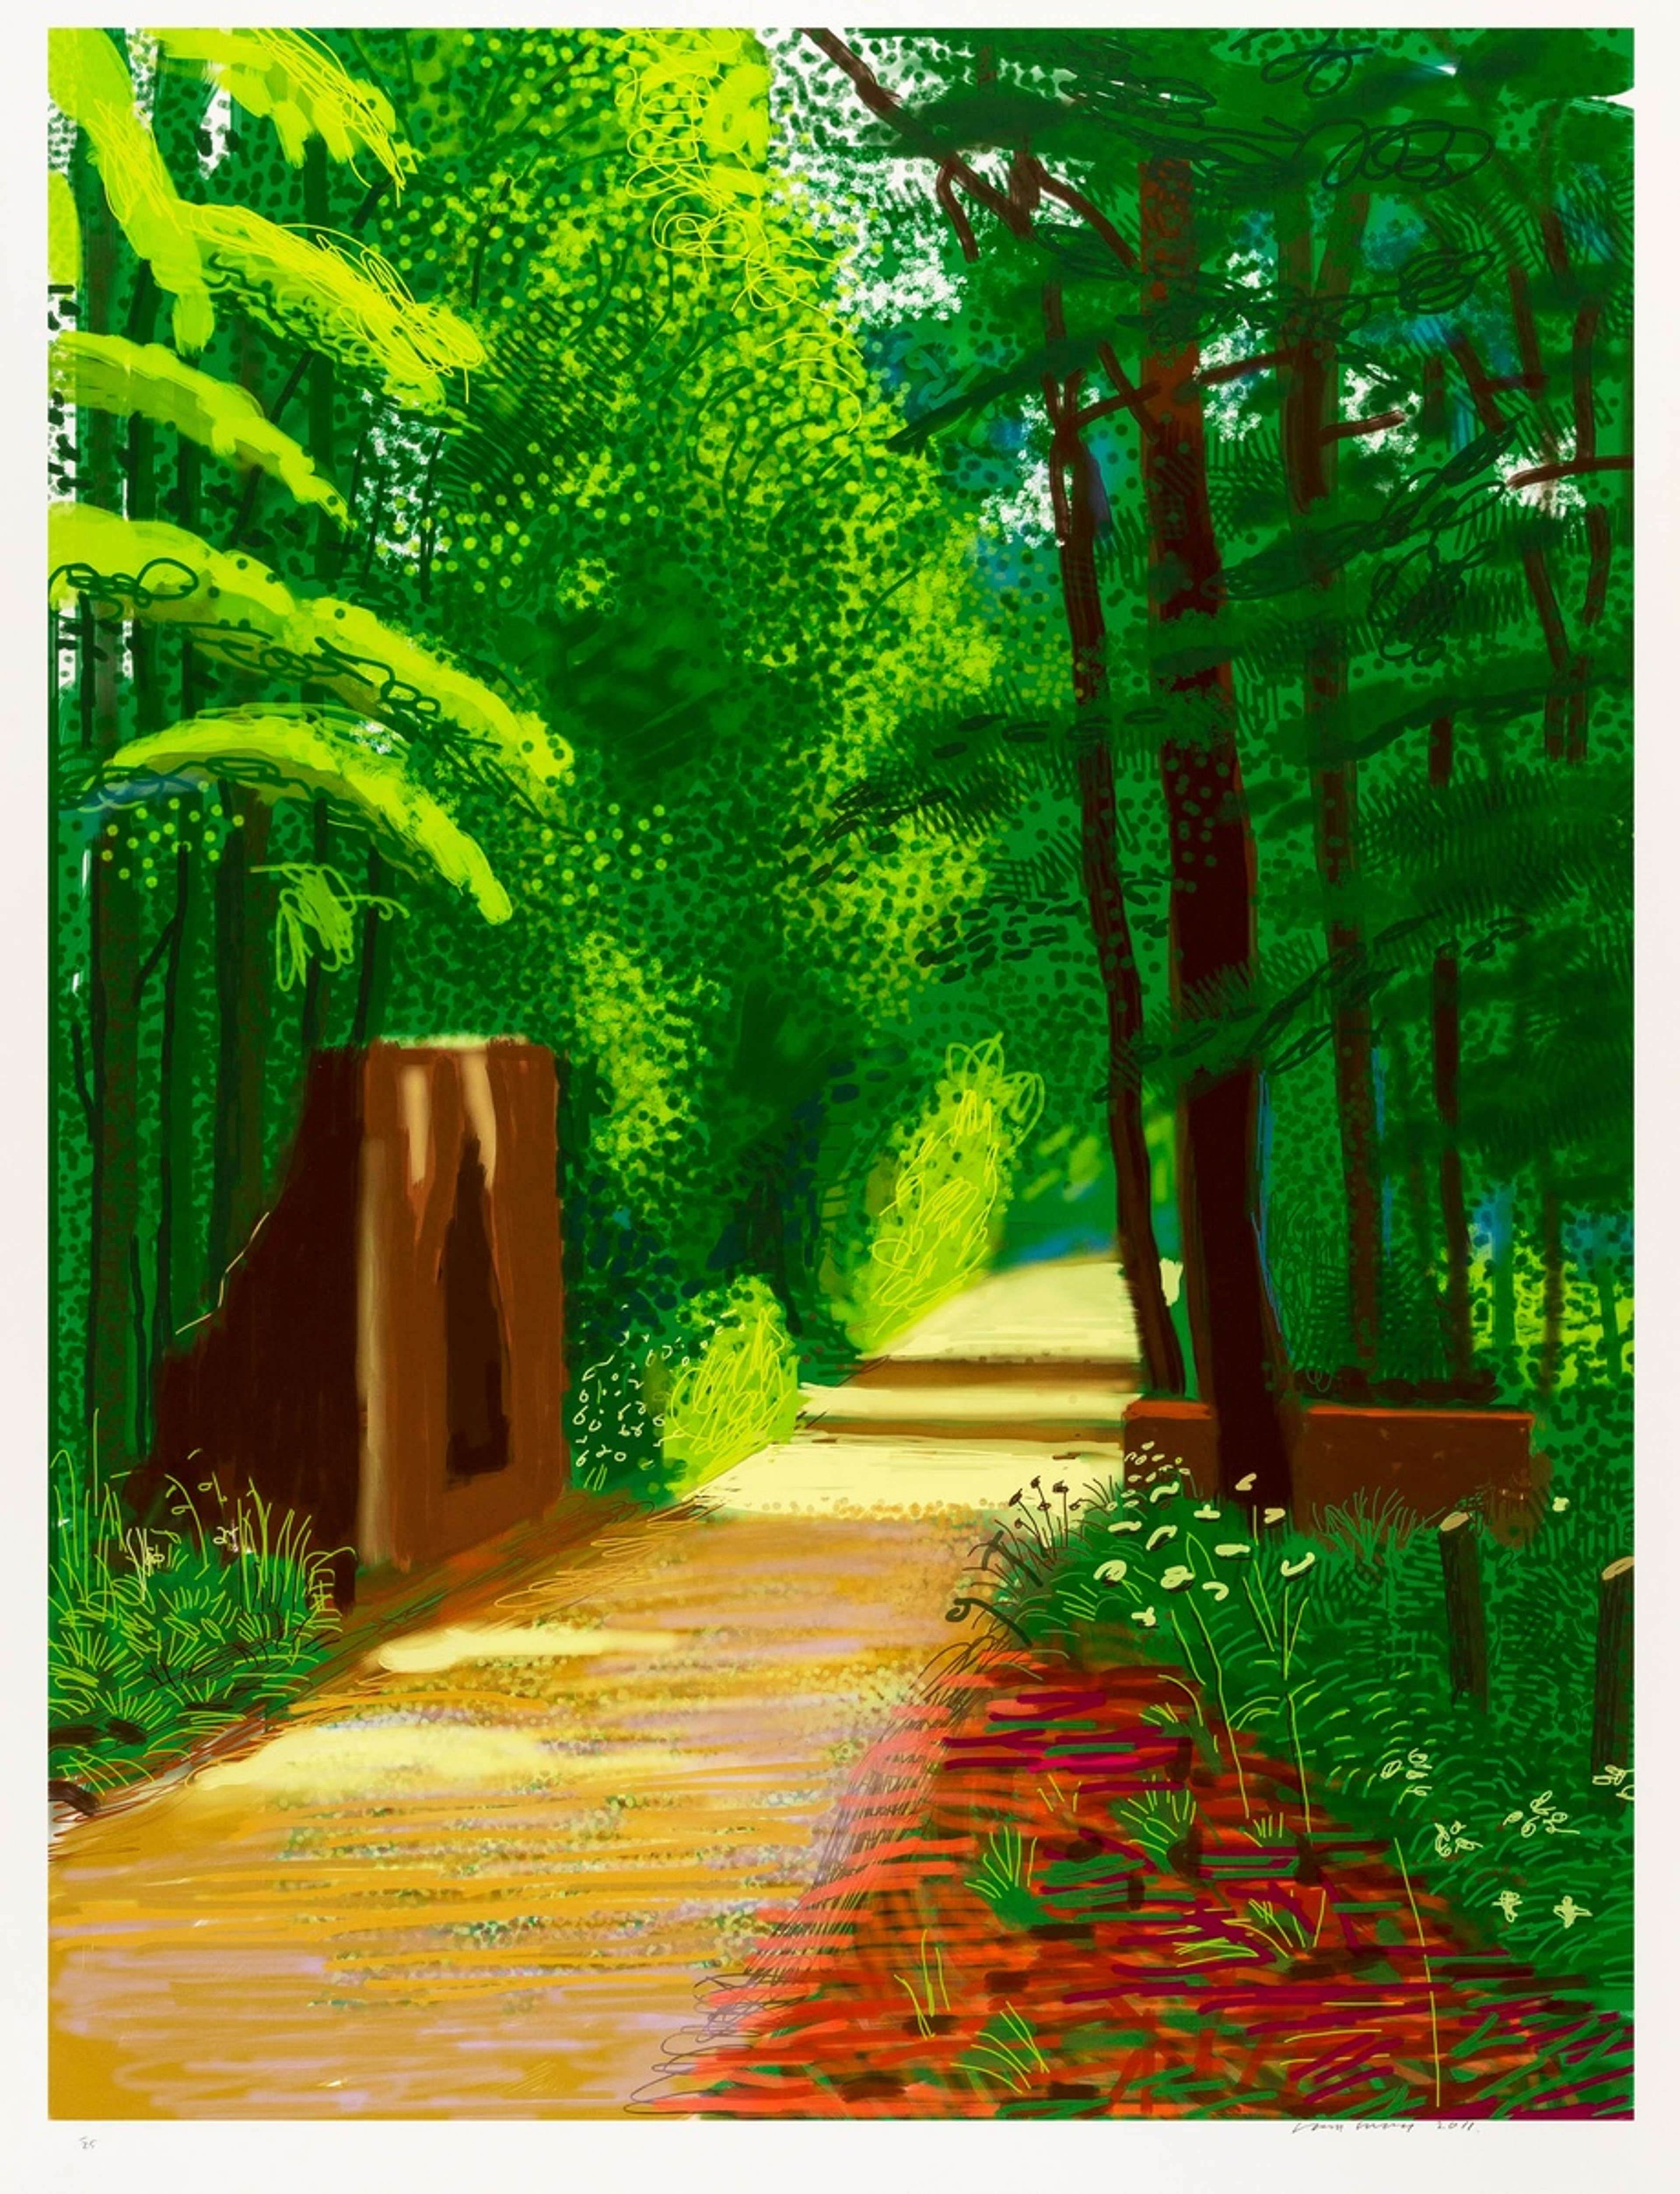 The Arrival Of Spring In Woldgate East Yorkshire 2nd June 2011 - Signed Print